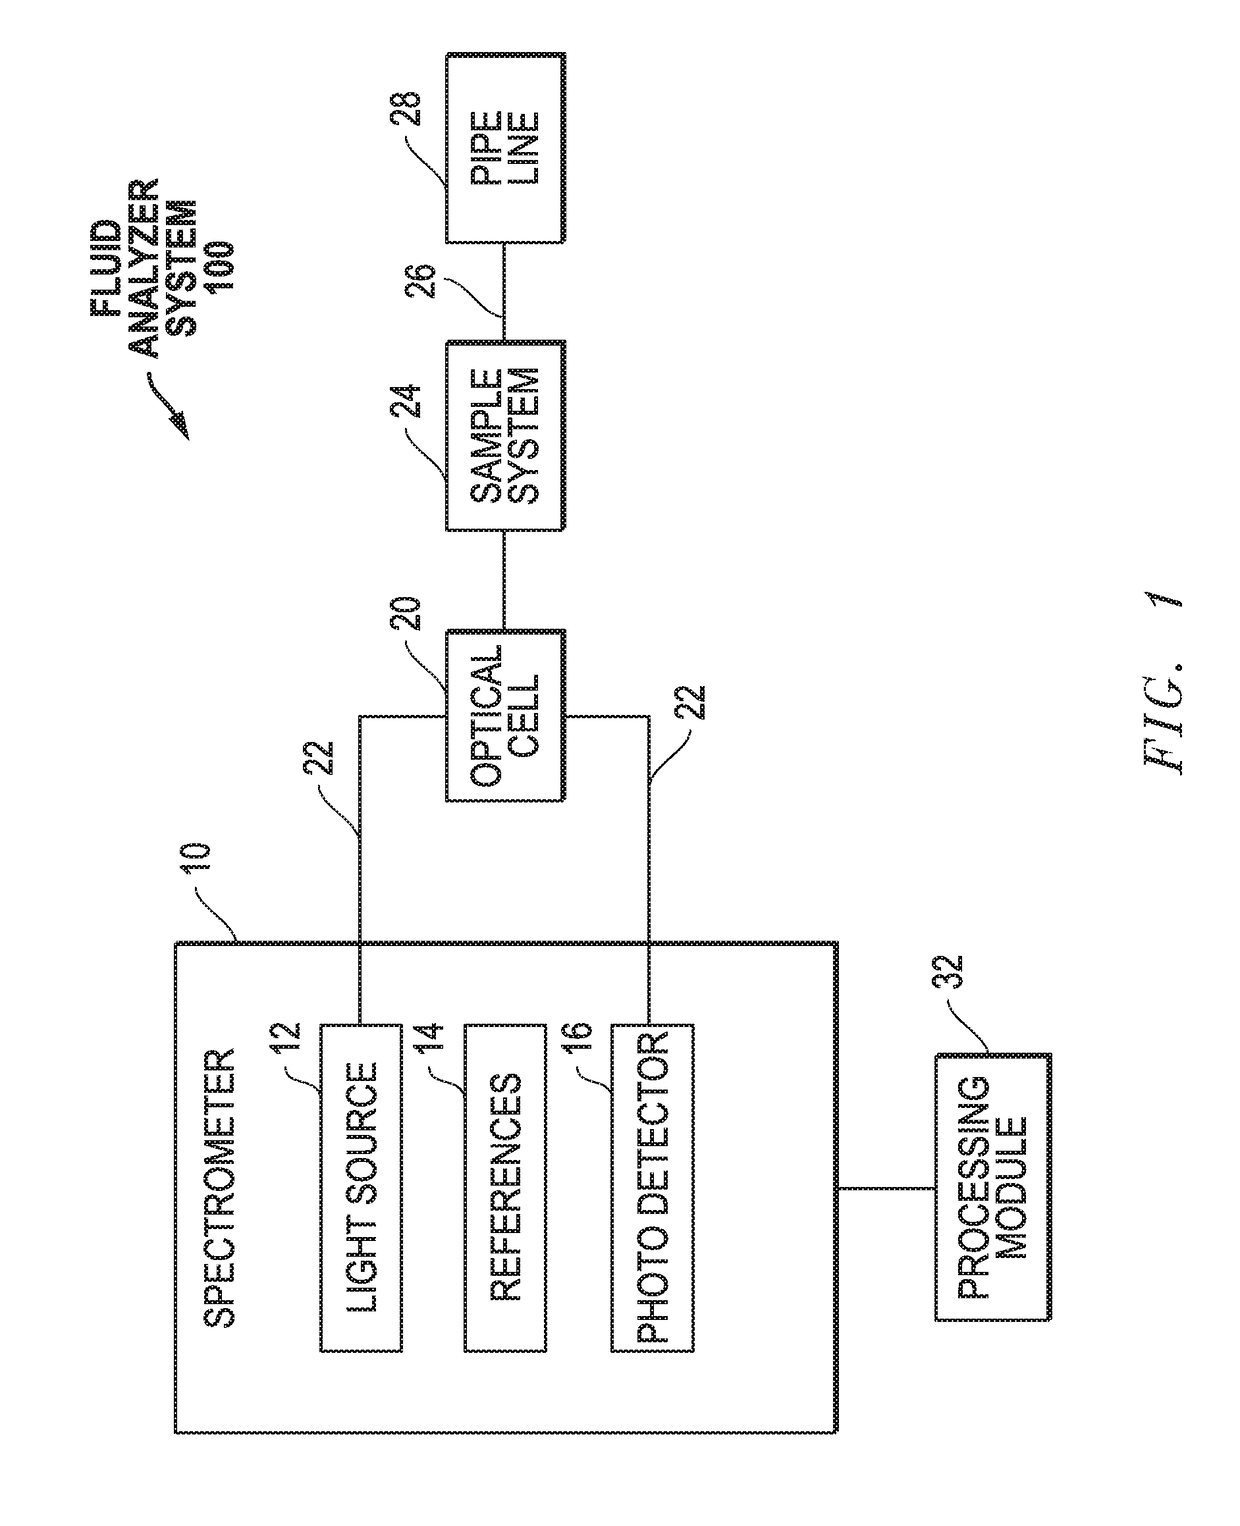 System and method for determining vapor pressure of produced hydrocarbon streams via spectroscopy